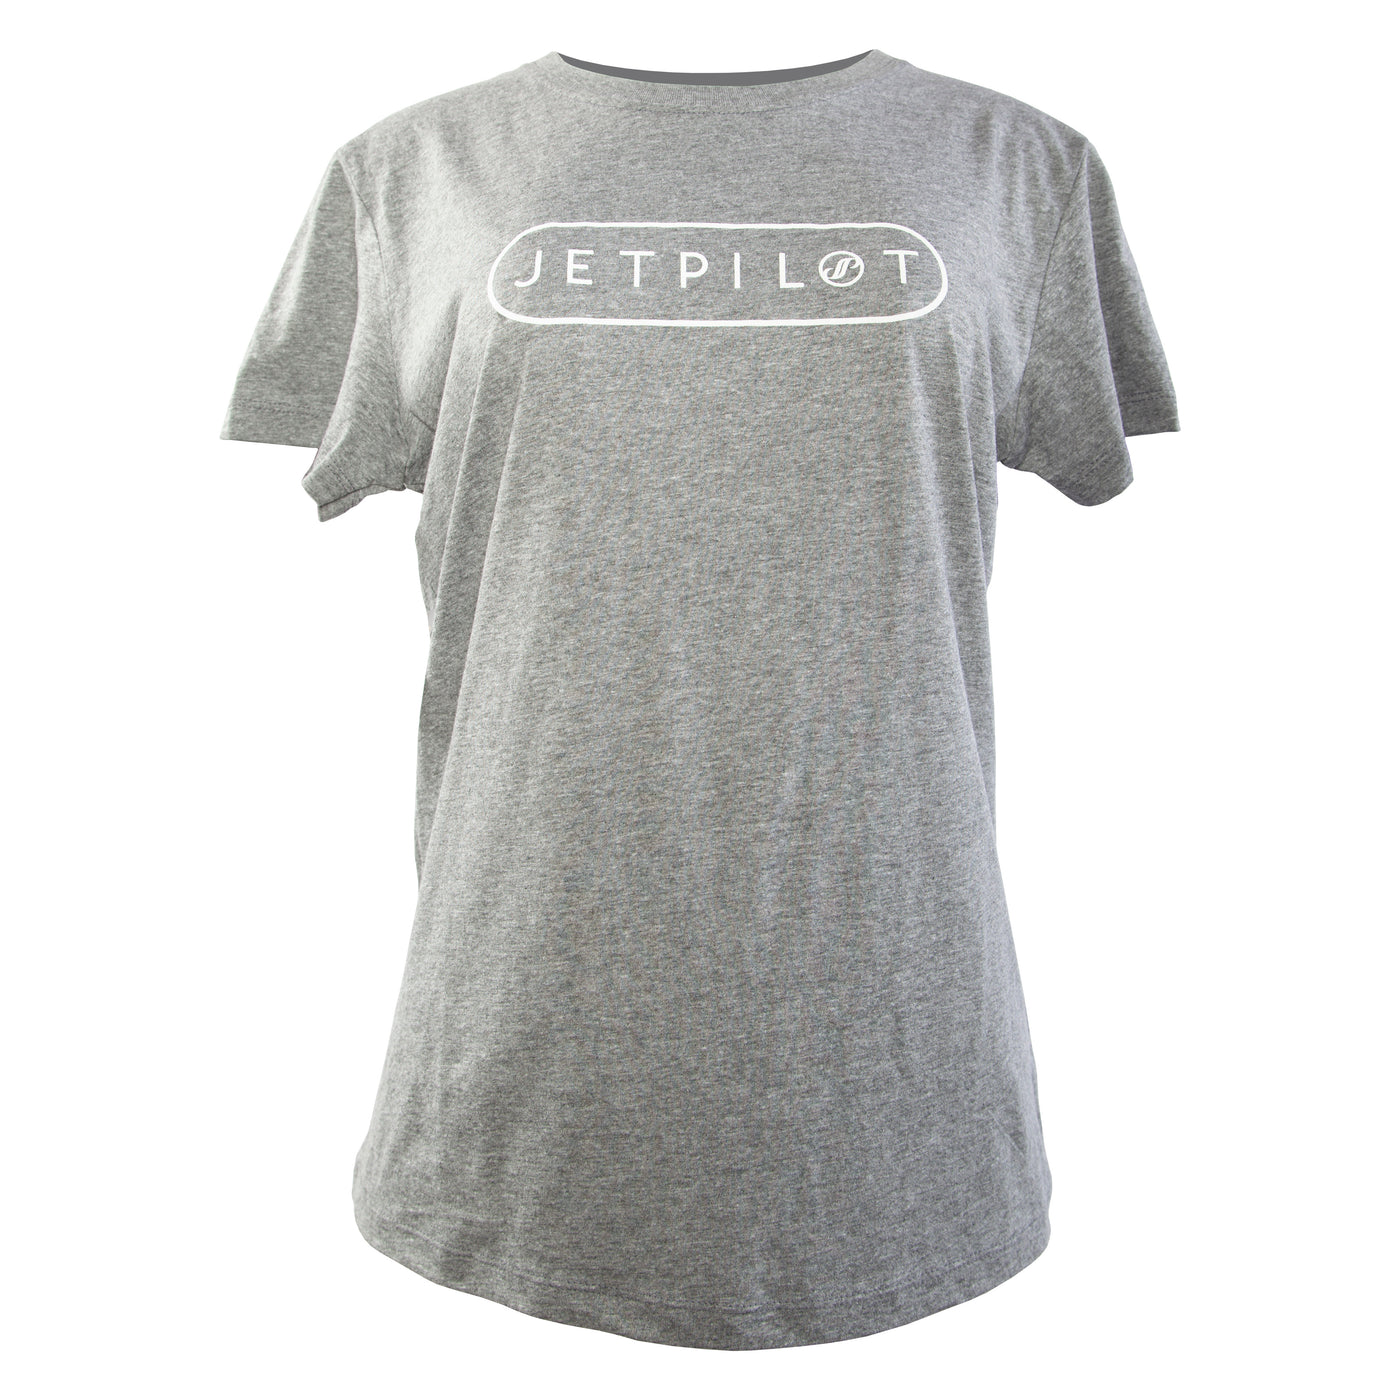 Front view of the women's wave farer tee